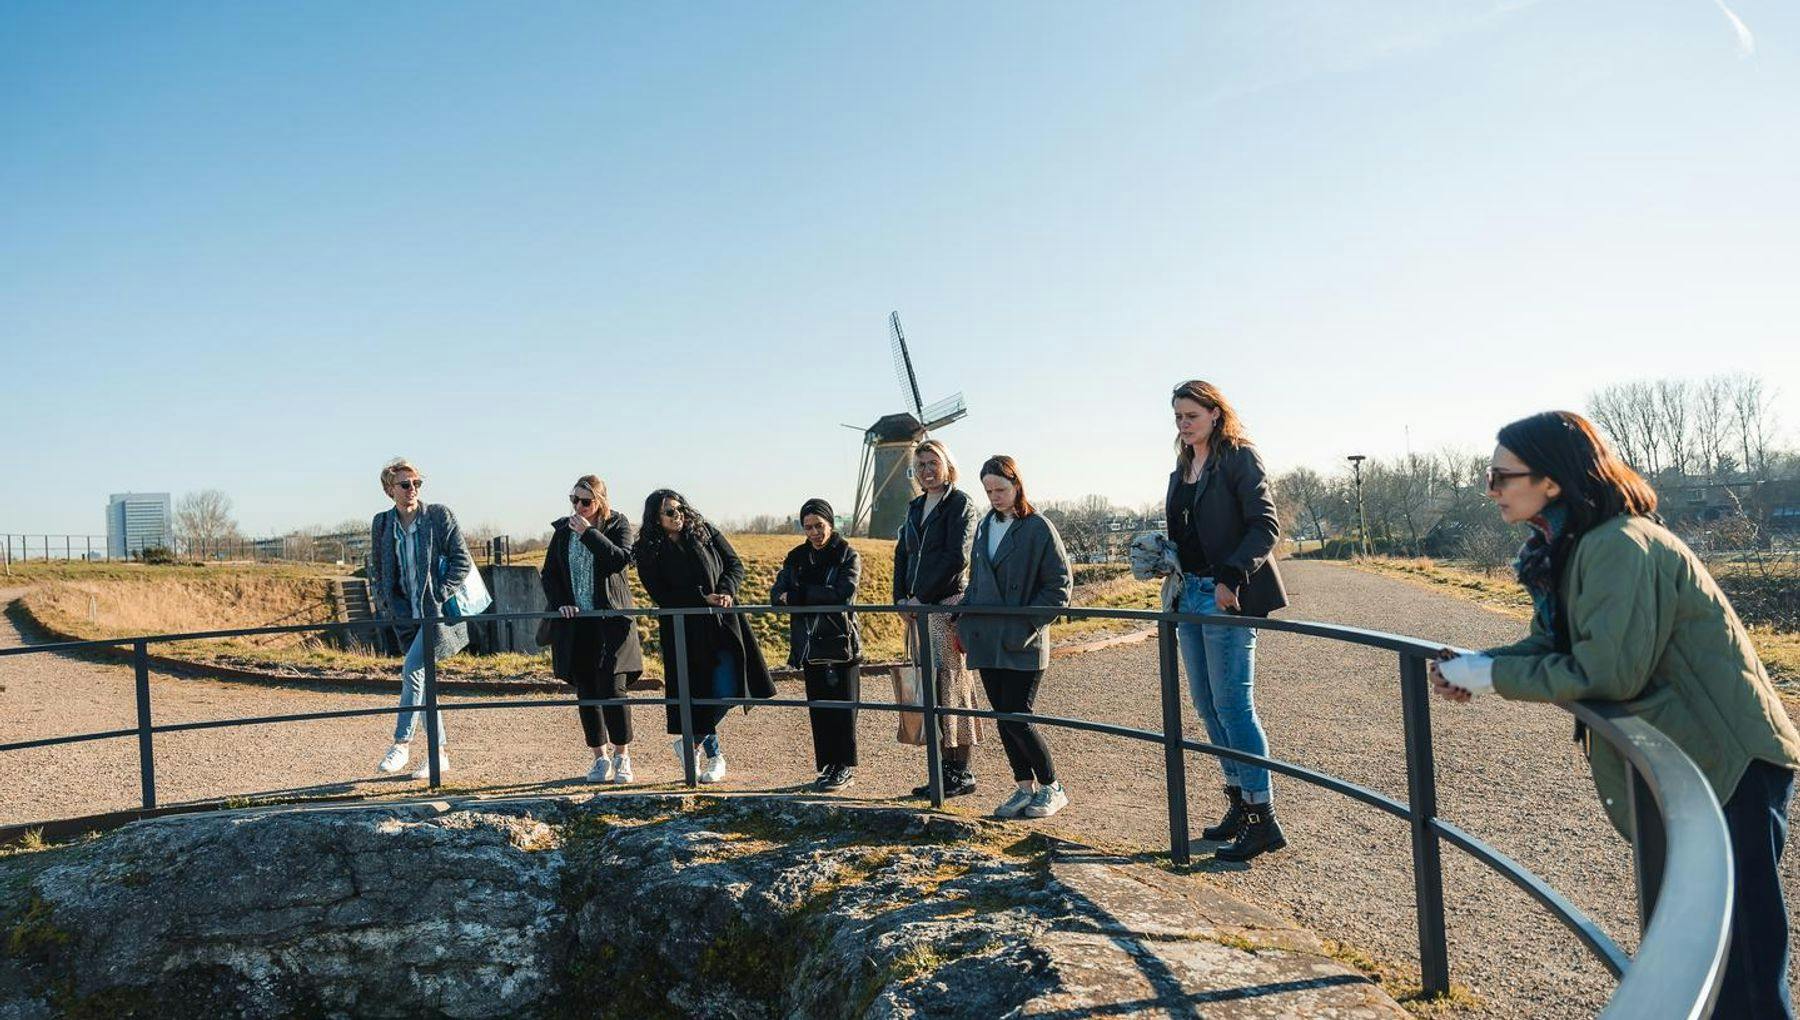 A group of people taking a tour of the Fort van Hoofddorp